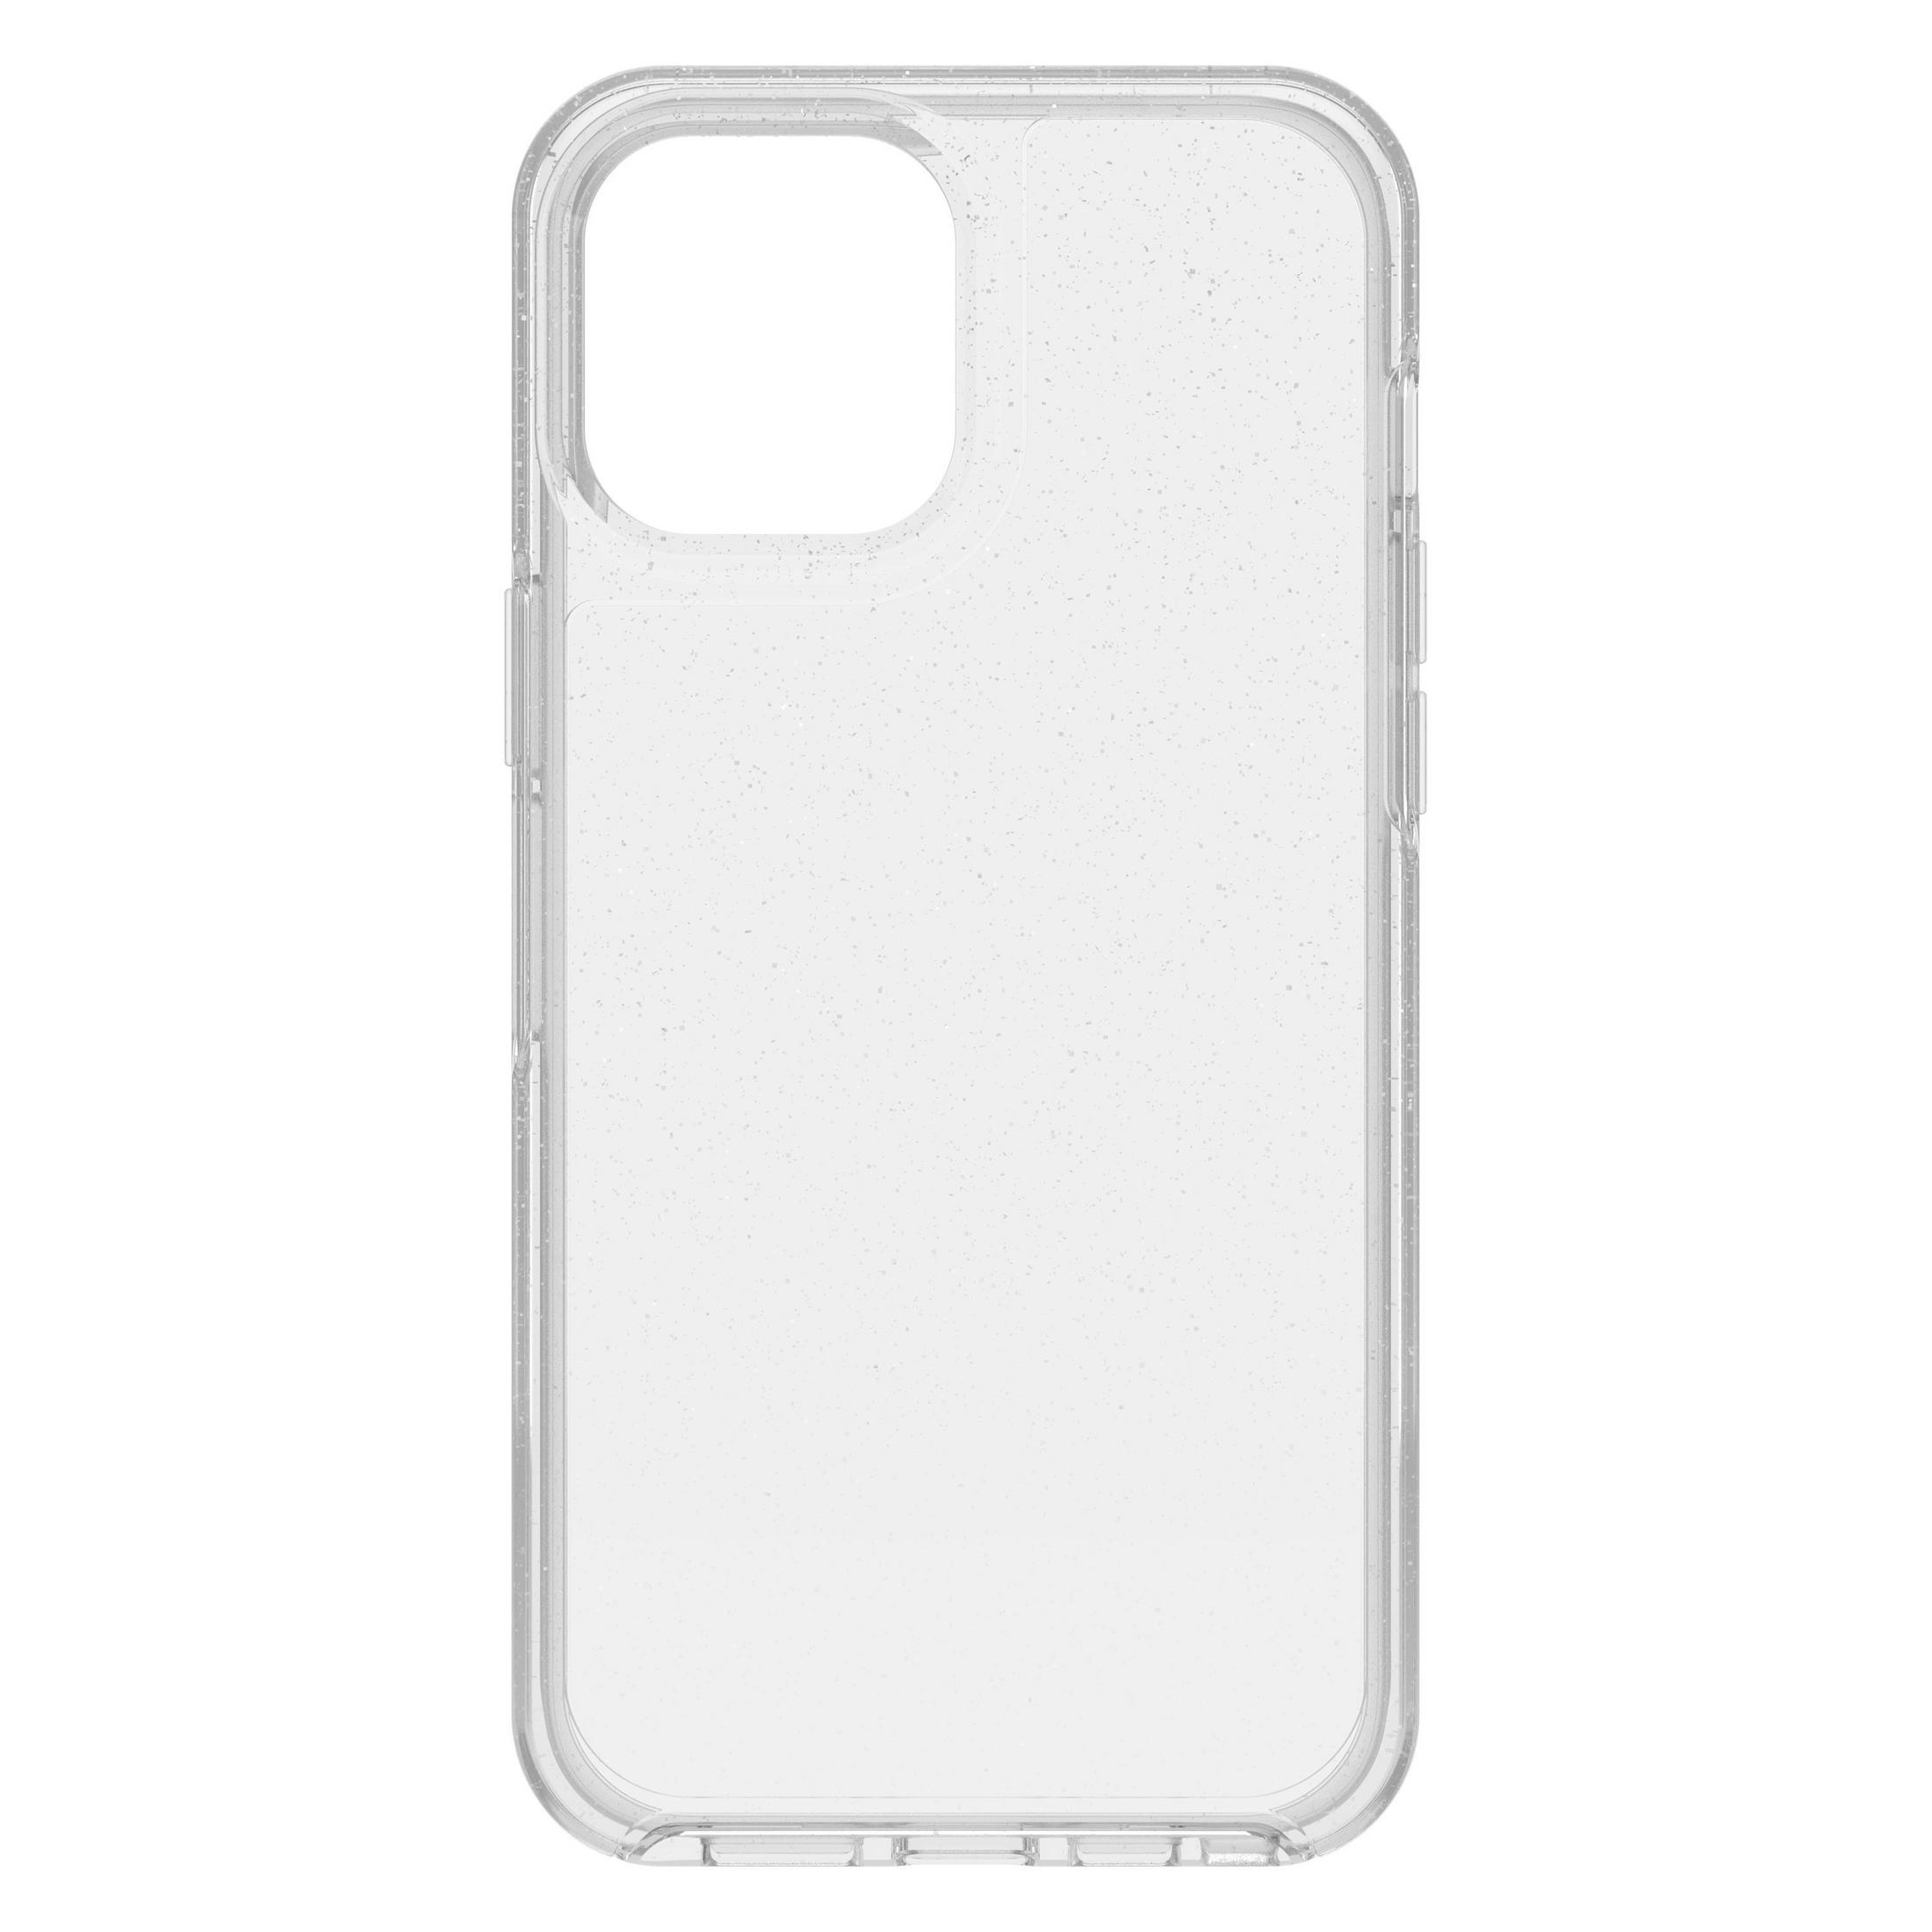 IP 12 Pro OTTERBOX Apple, PRO 77-65471 iPhone Transparent/Glitzer SYMMETRY Backcover, CLEAR STARDUST MAX CL., Max, 12